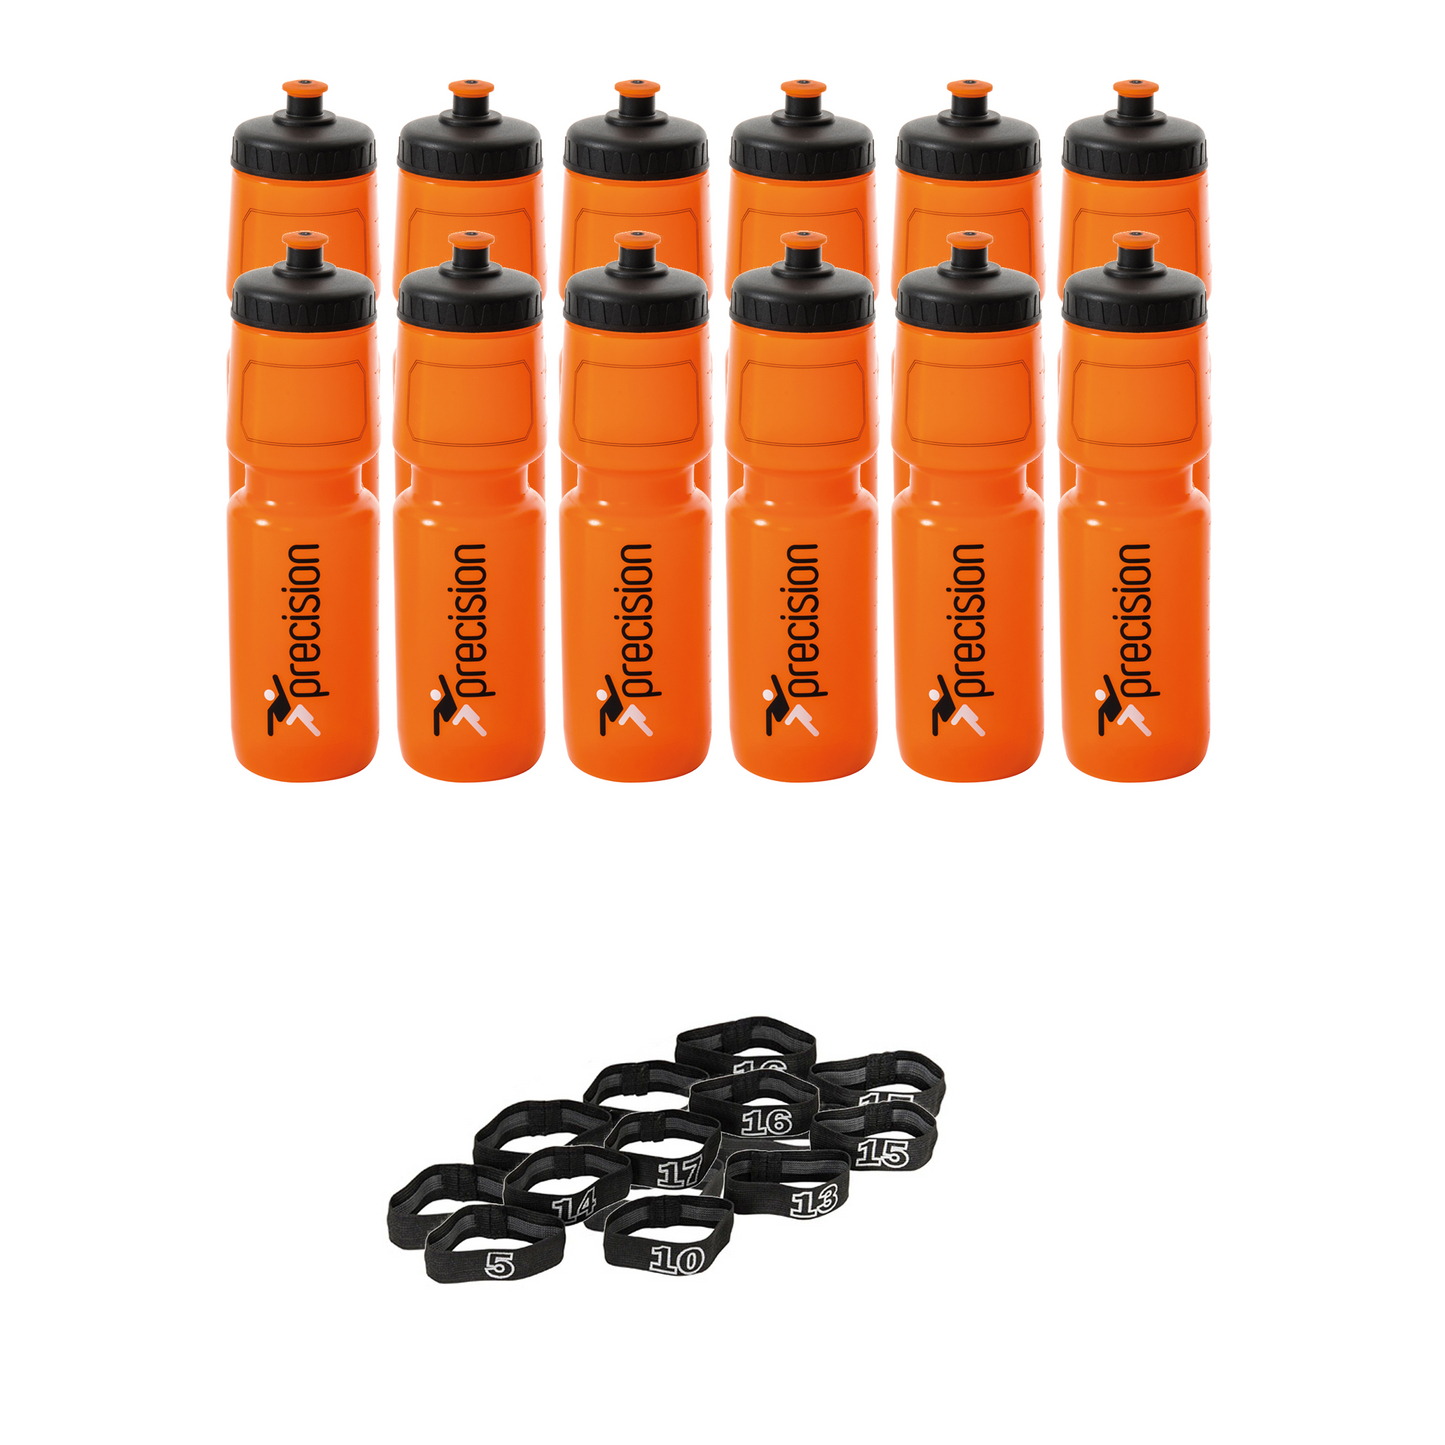 10, 12 or 16 football team 750ml water bottles, bottle carrier and number bands